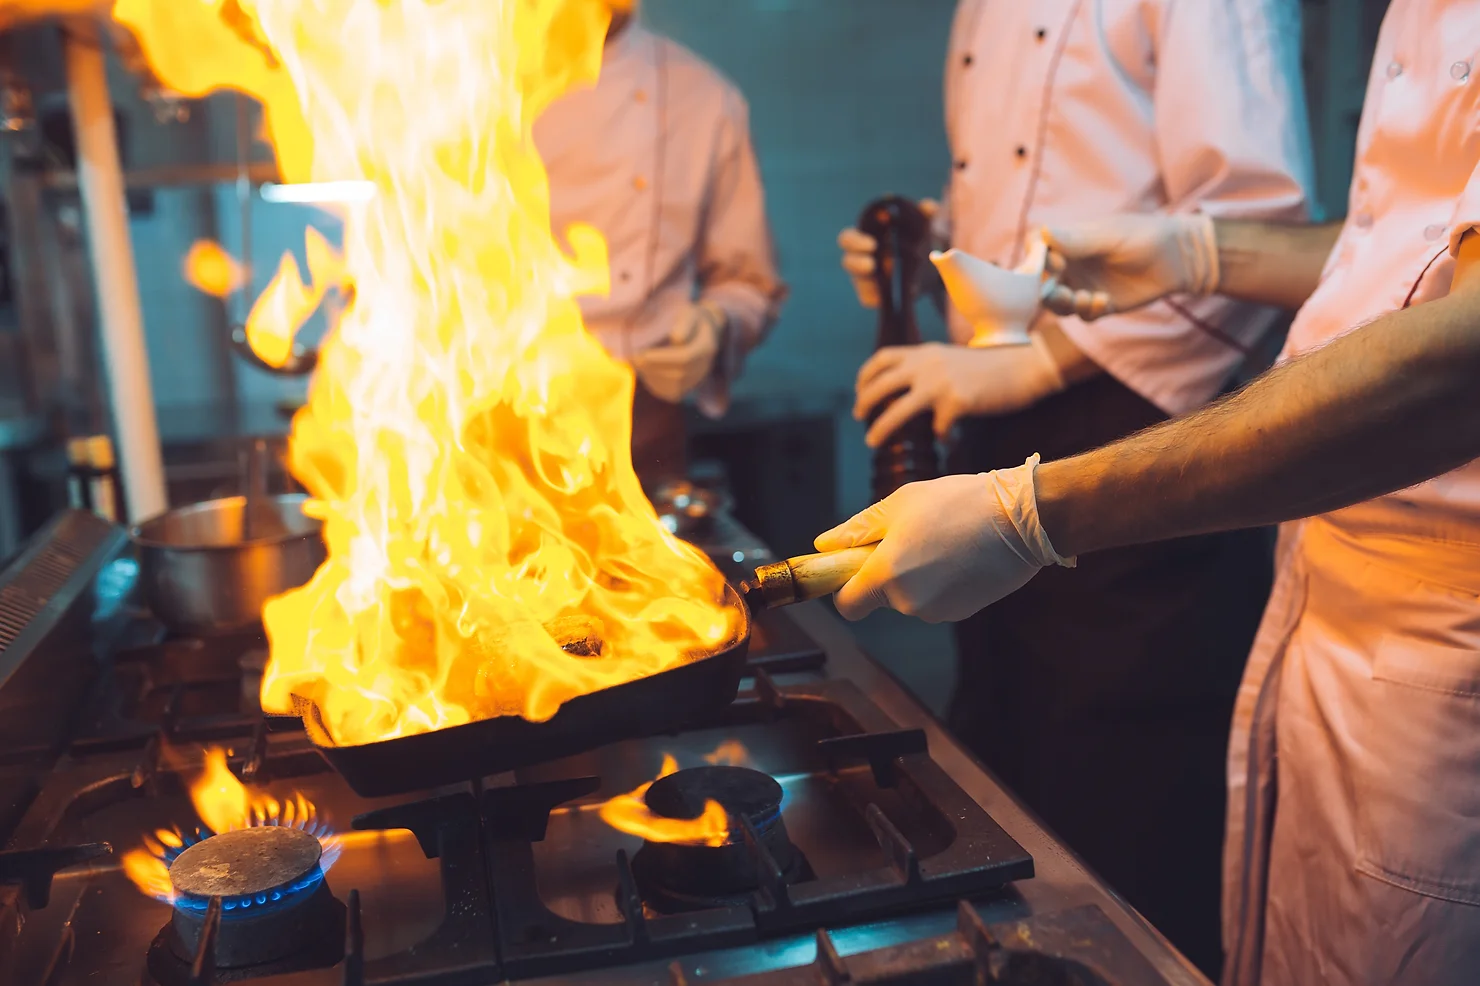 A person is cooking with a large flame bursting from a pan on a gas stove, with other people and kitchen equipment in the background.